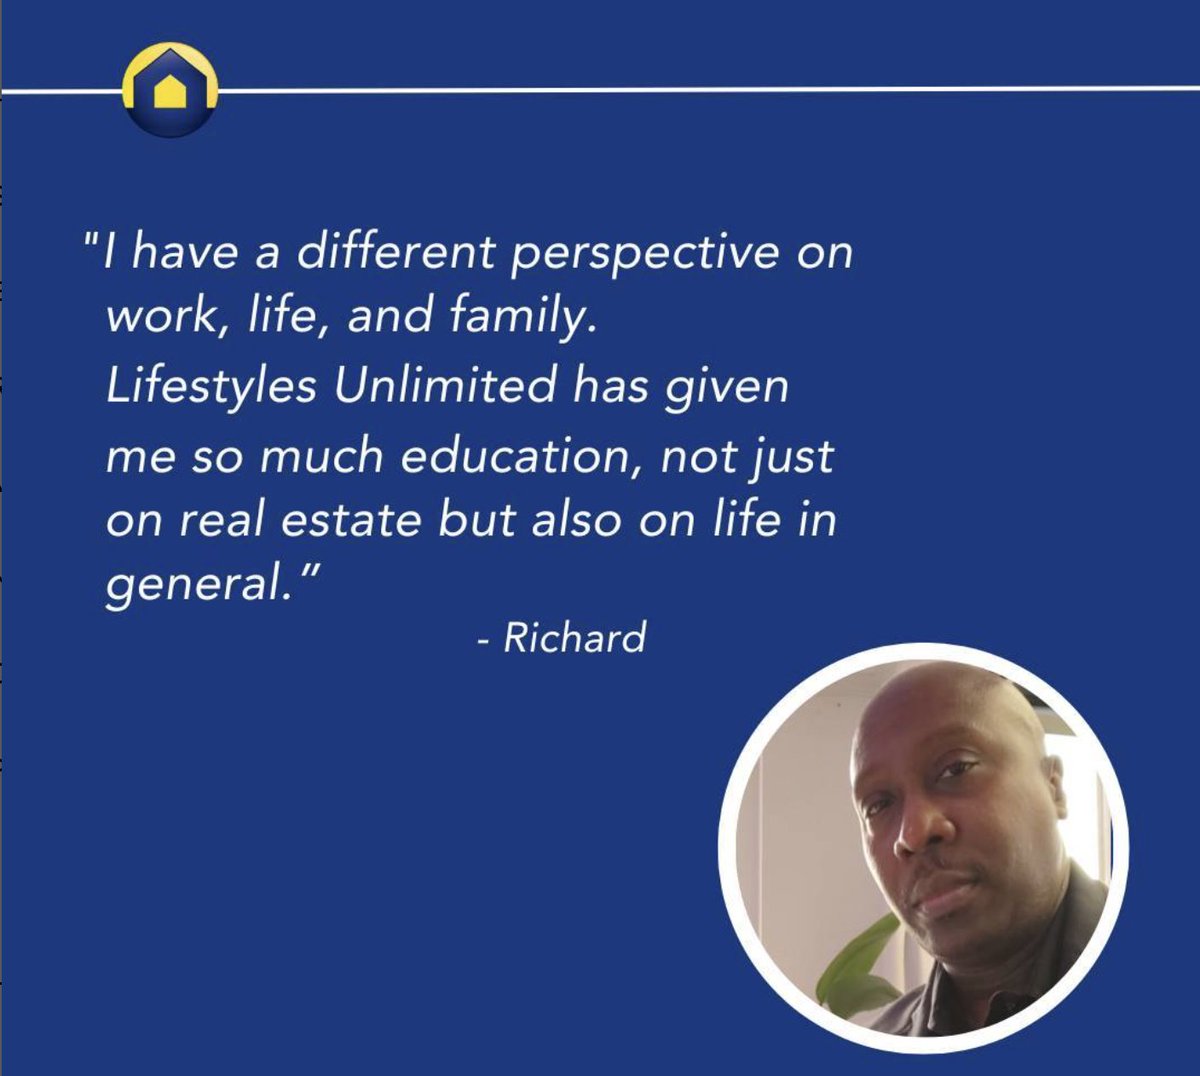 'I have a different perspective on work, life, and family...' #FinancialFreedom #RealEstateInvesting #RentalRealEstateInvesting #KnowledgeIsPower #Testimonial #LifestylesUnlimited #PassiveIncome #FinancialFreedom